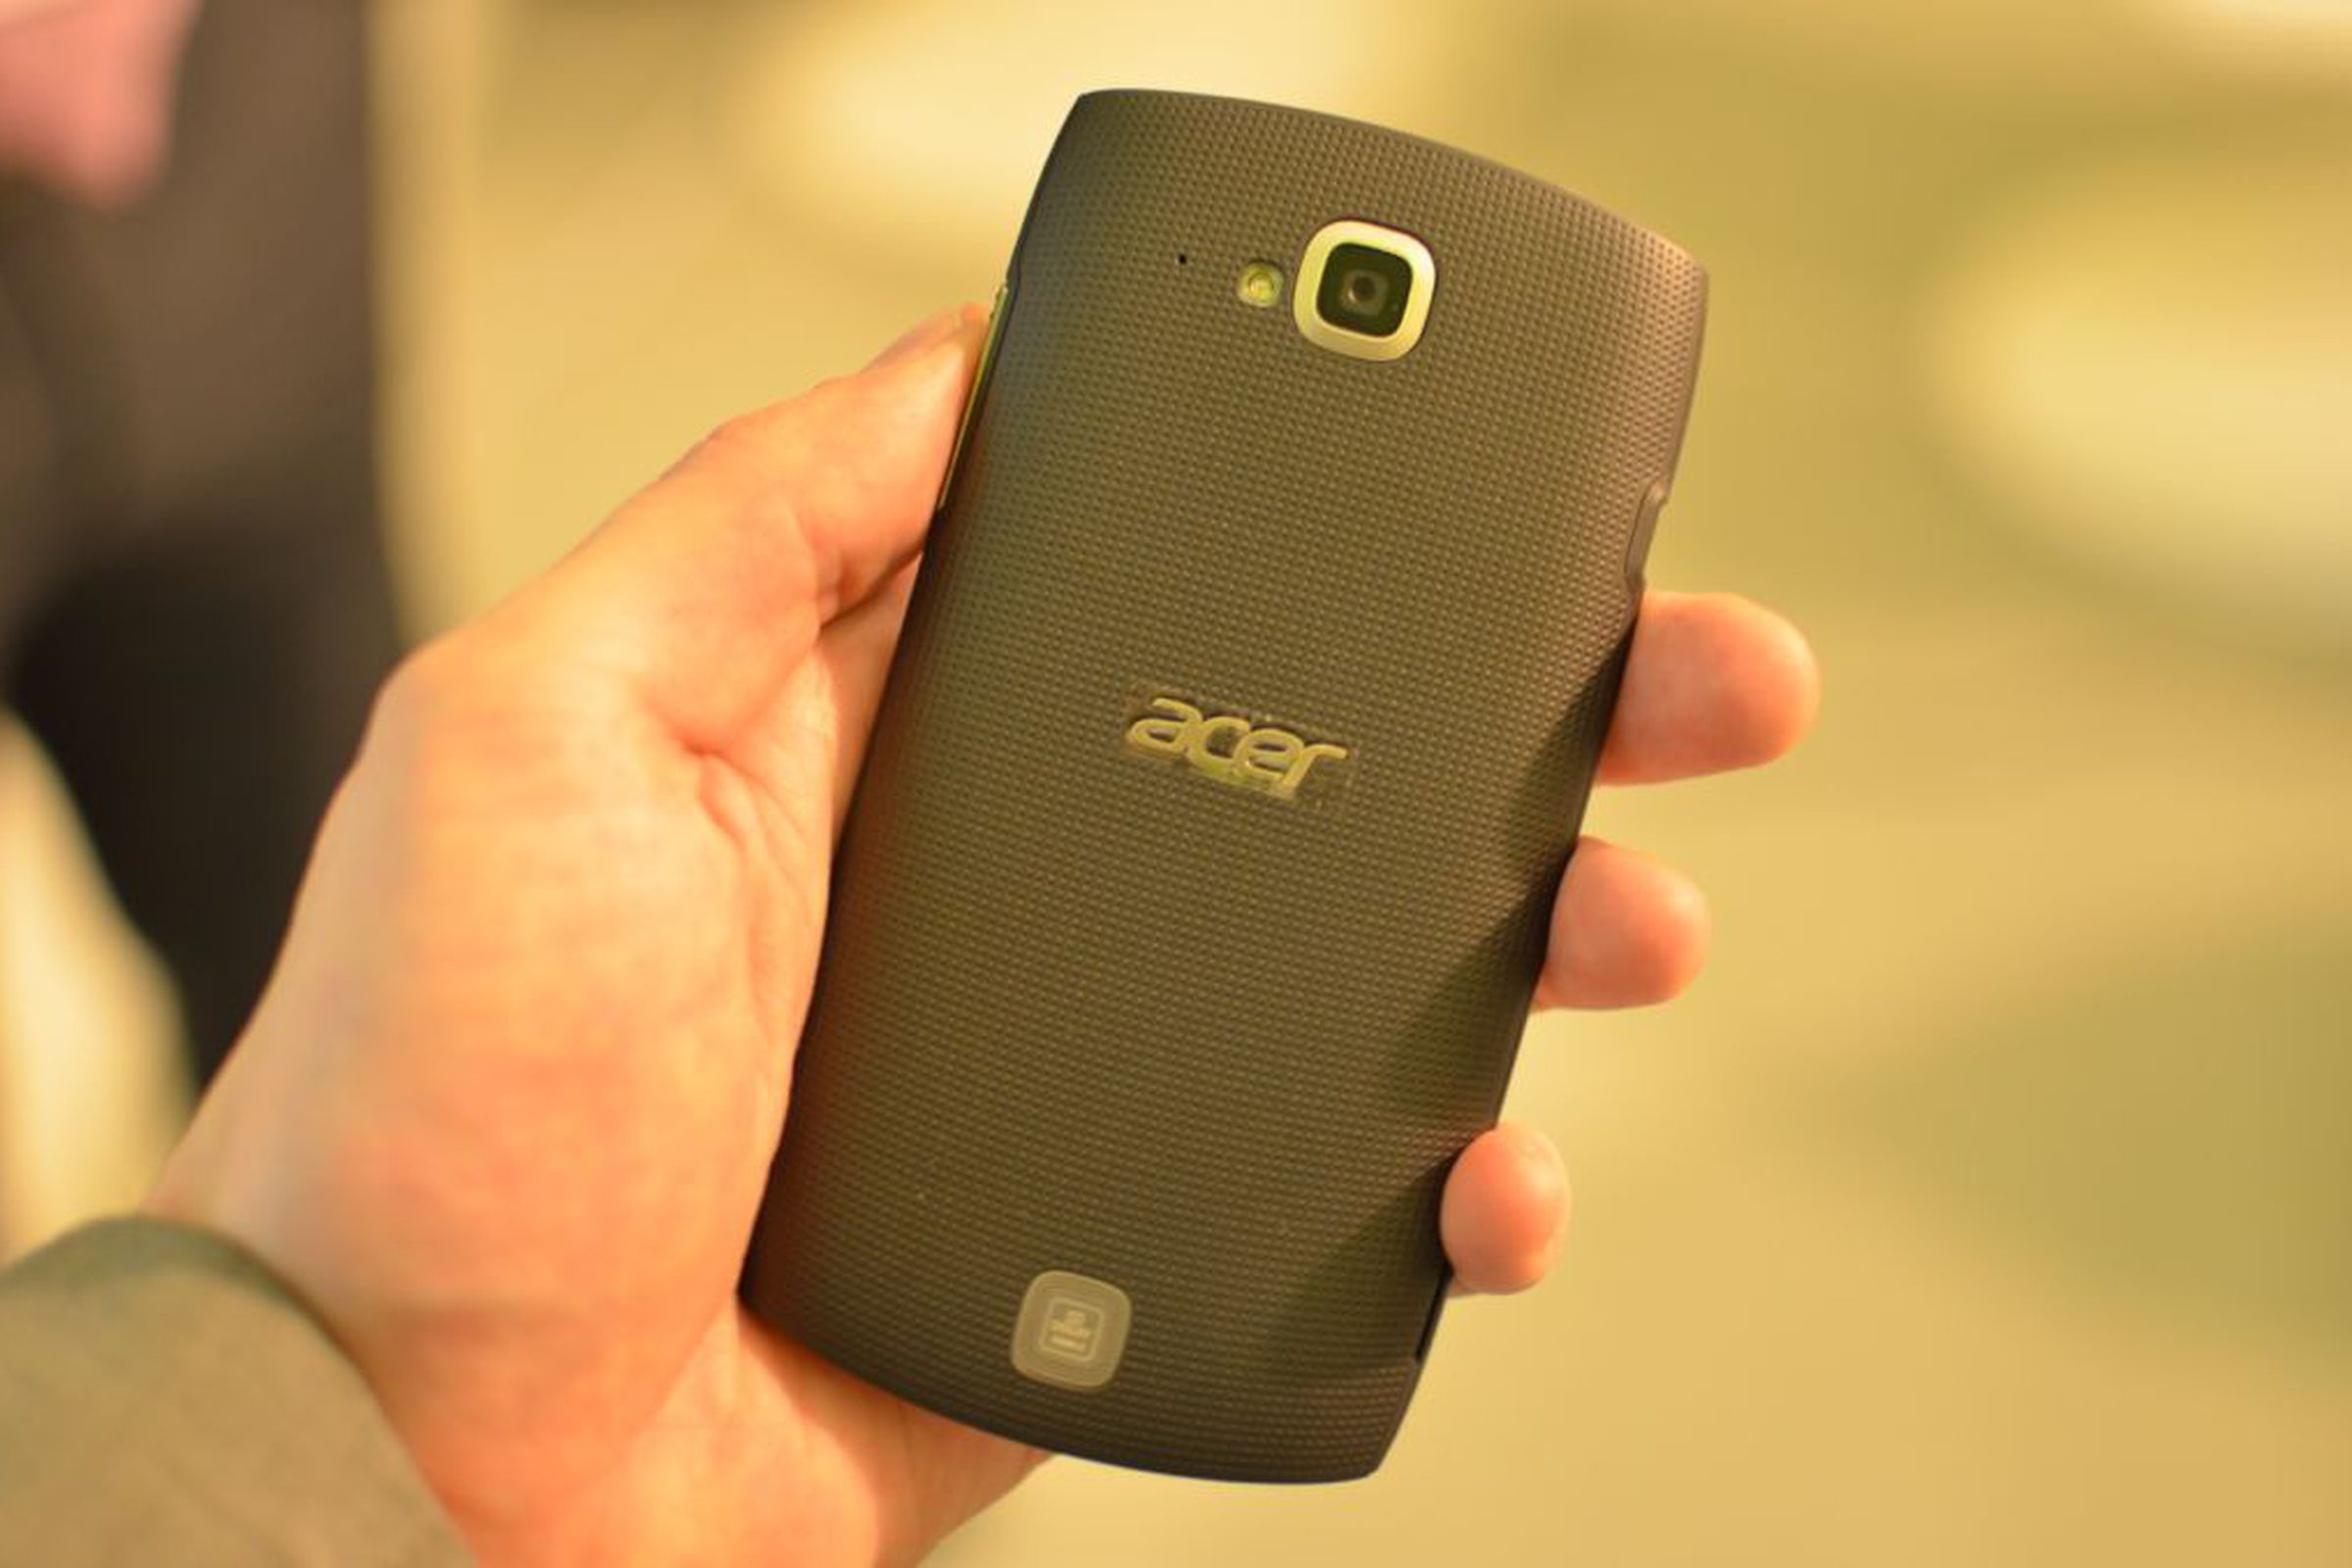 Gallery Photo: Acer CloudMobile hands-on photos